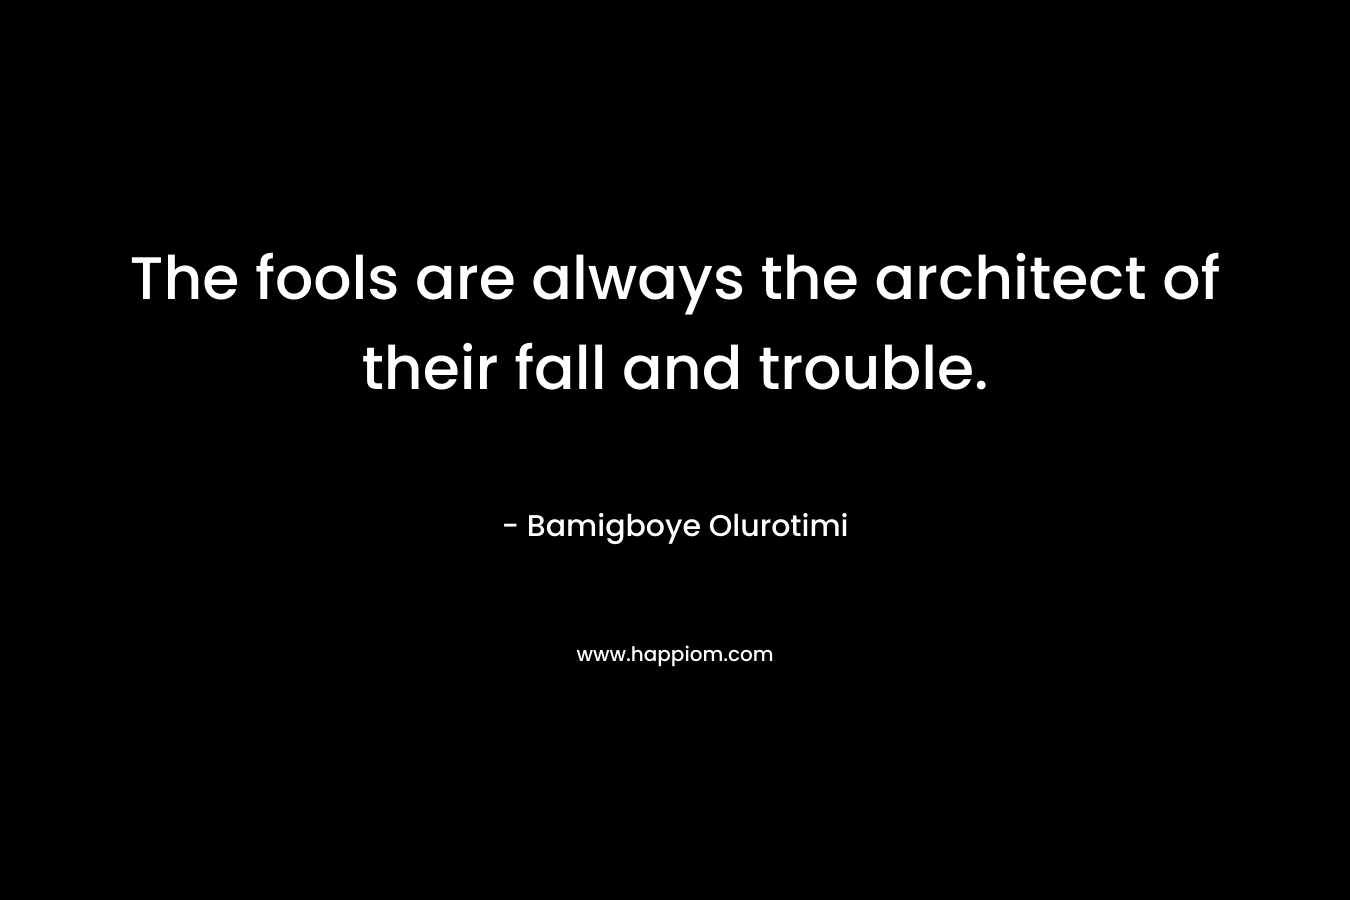 The fools are always the architect of their fall and trouble. – Bamigboye Olurotimi